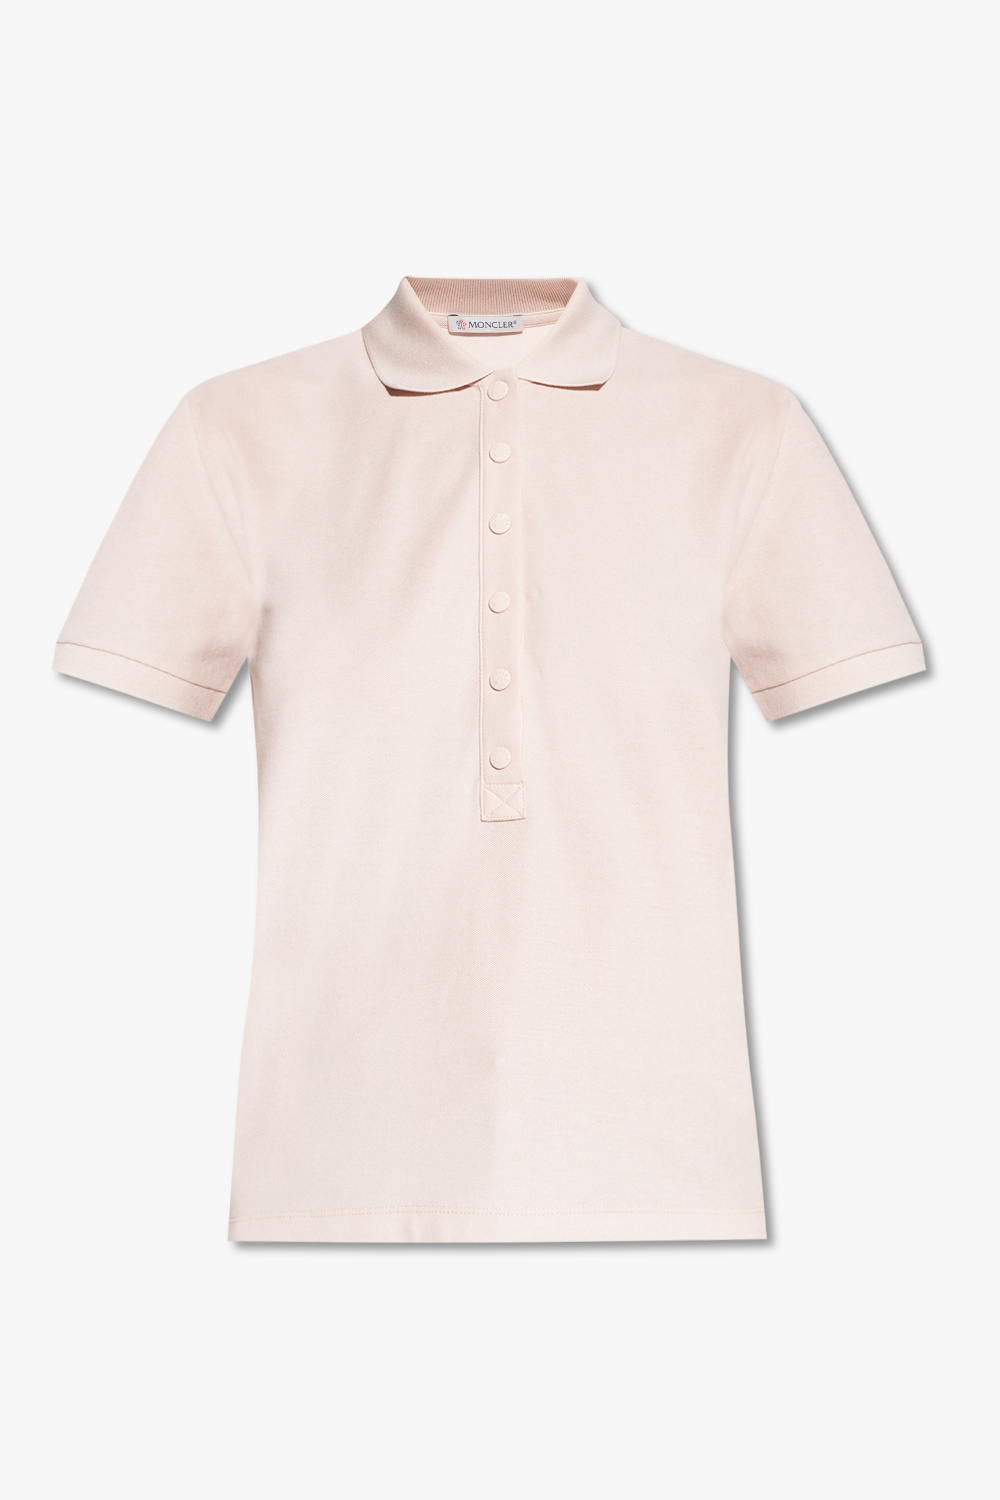 Moncler Kids Baby embroidered polo marr shirt Rosa